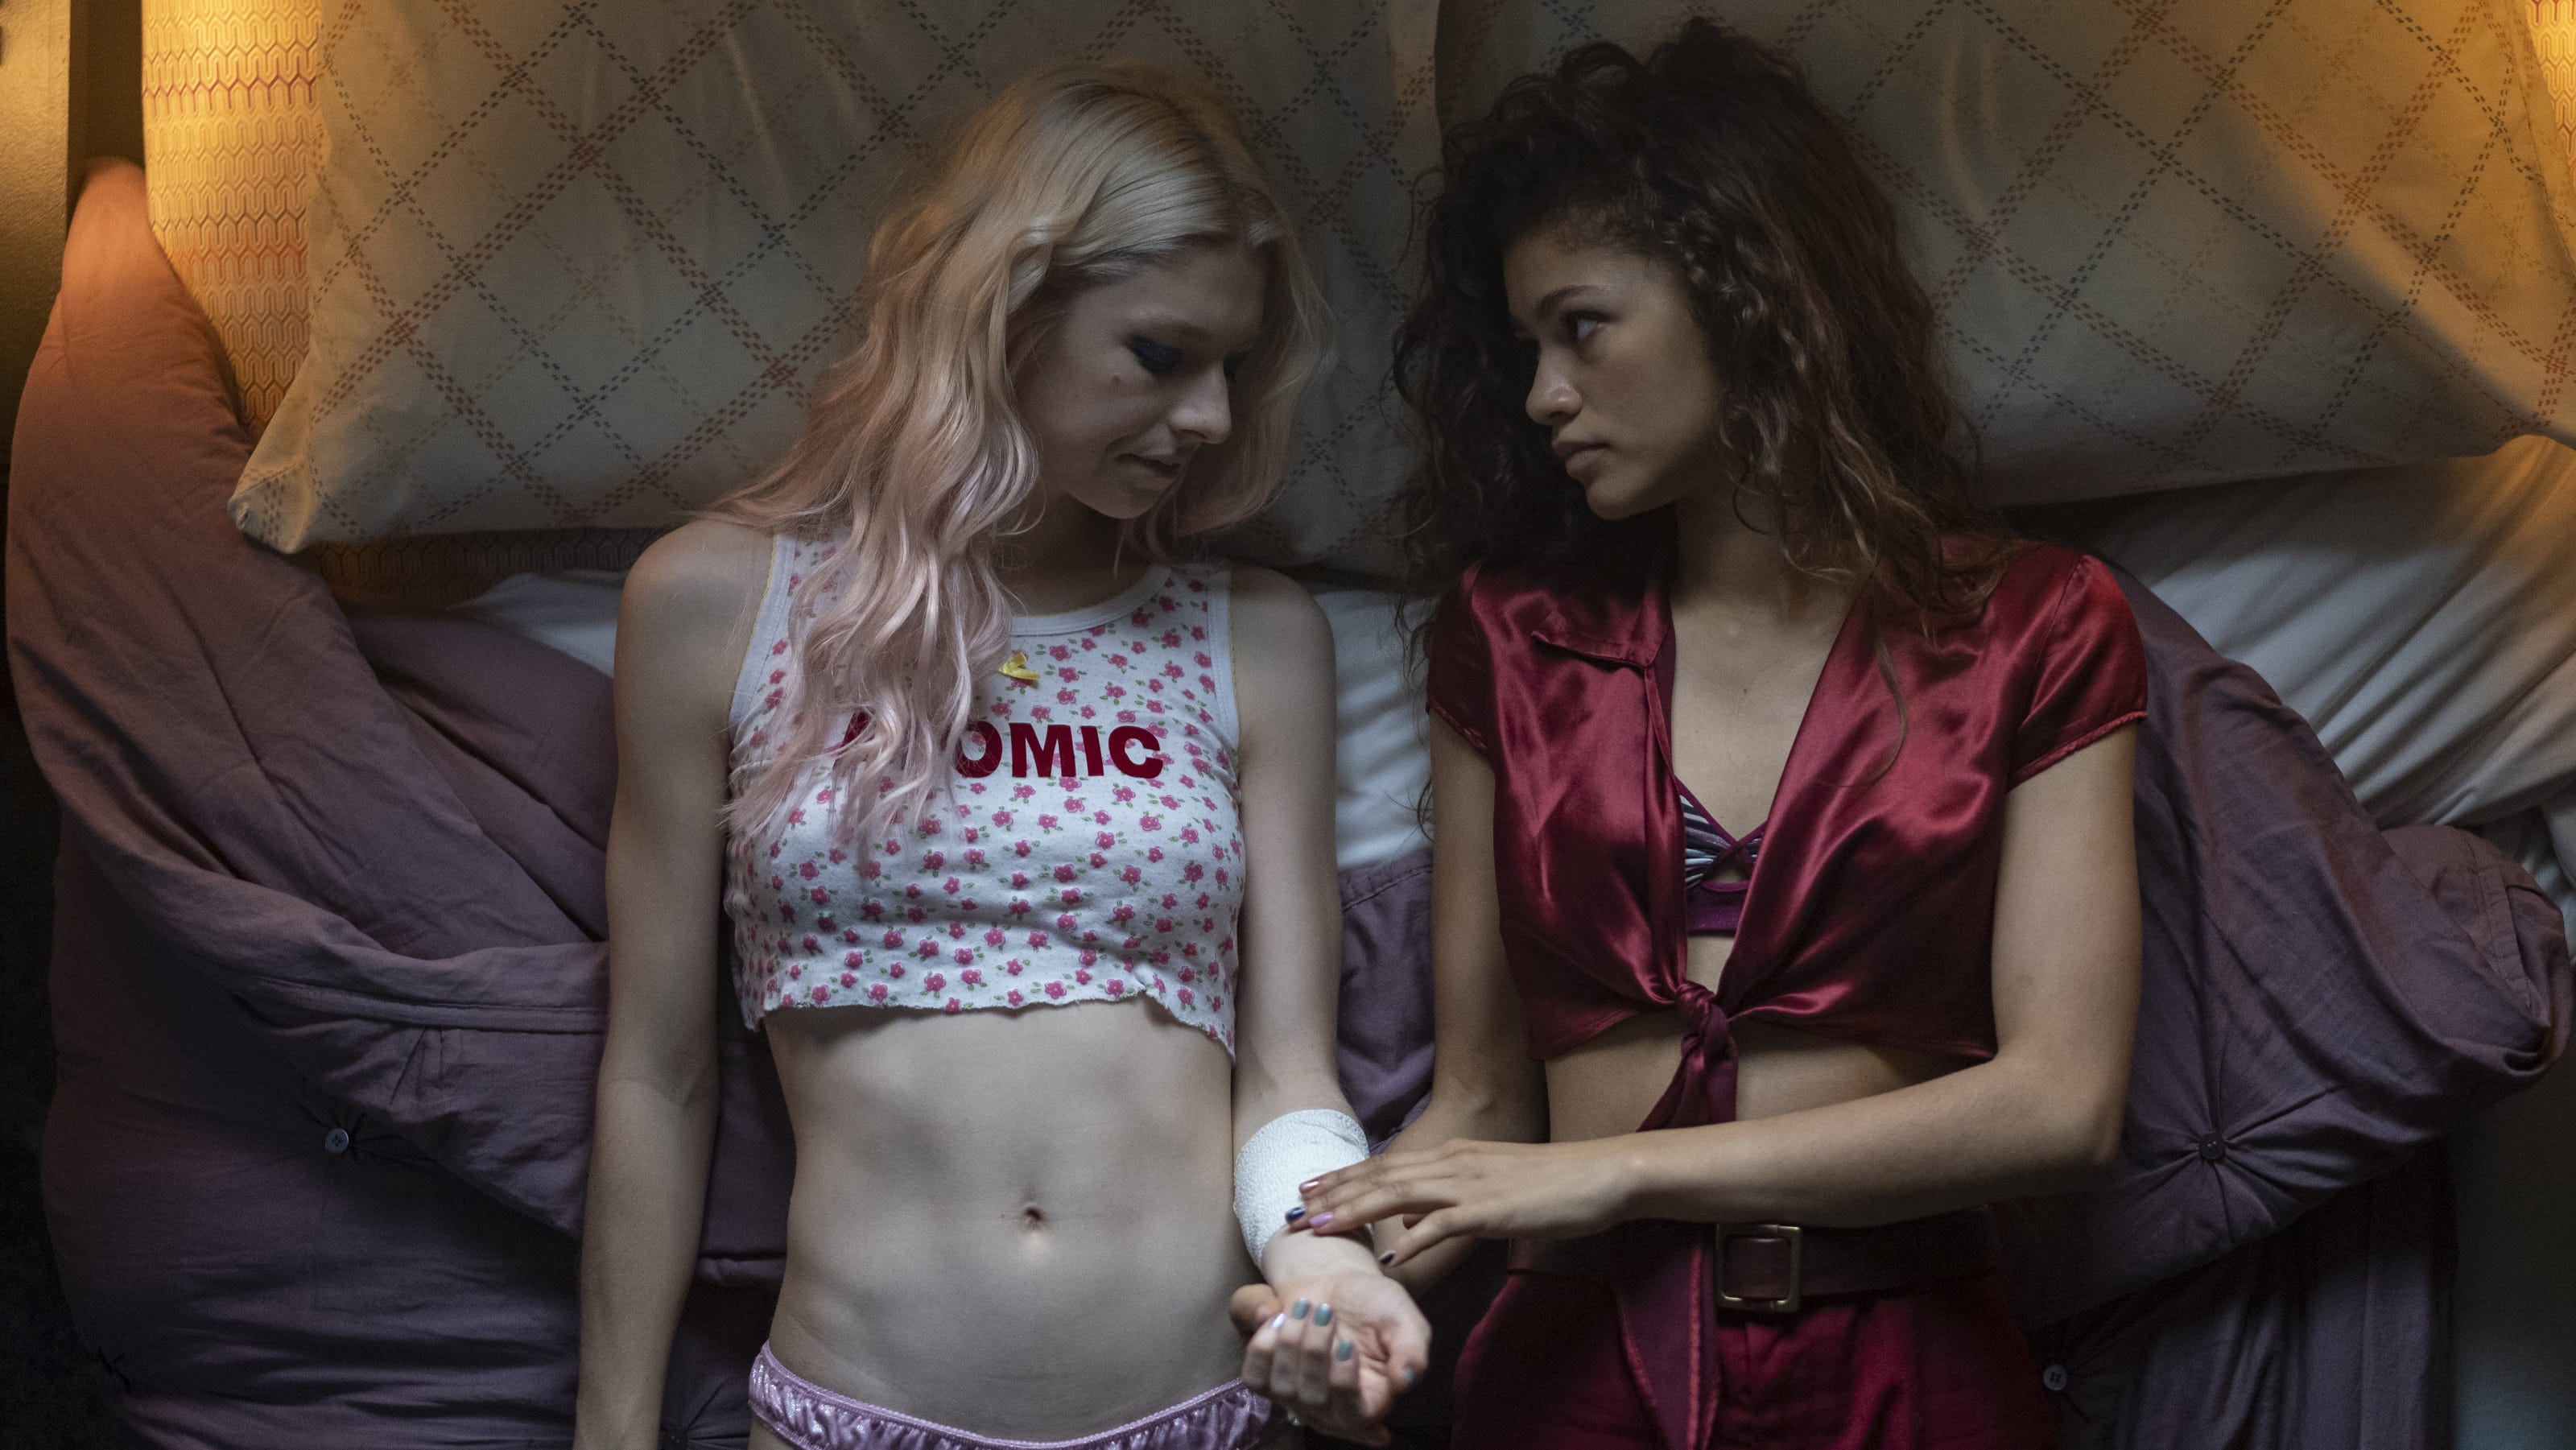 Are YA shows too explicit? 'Euphoria' director defends graphic sex